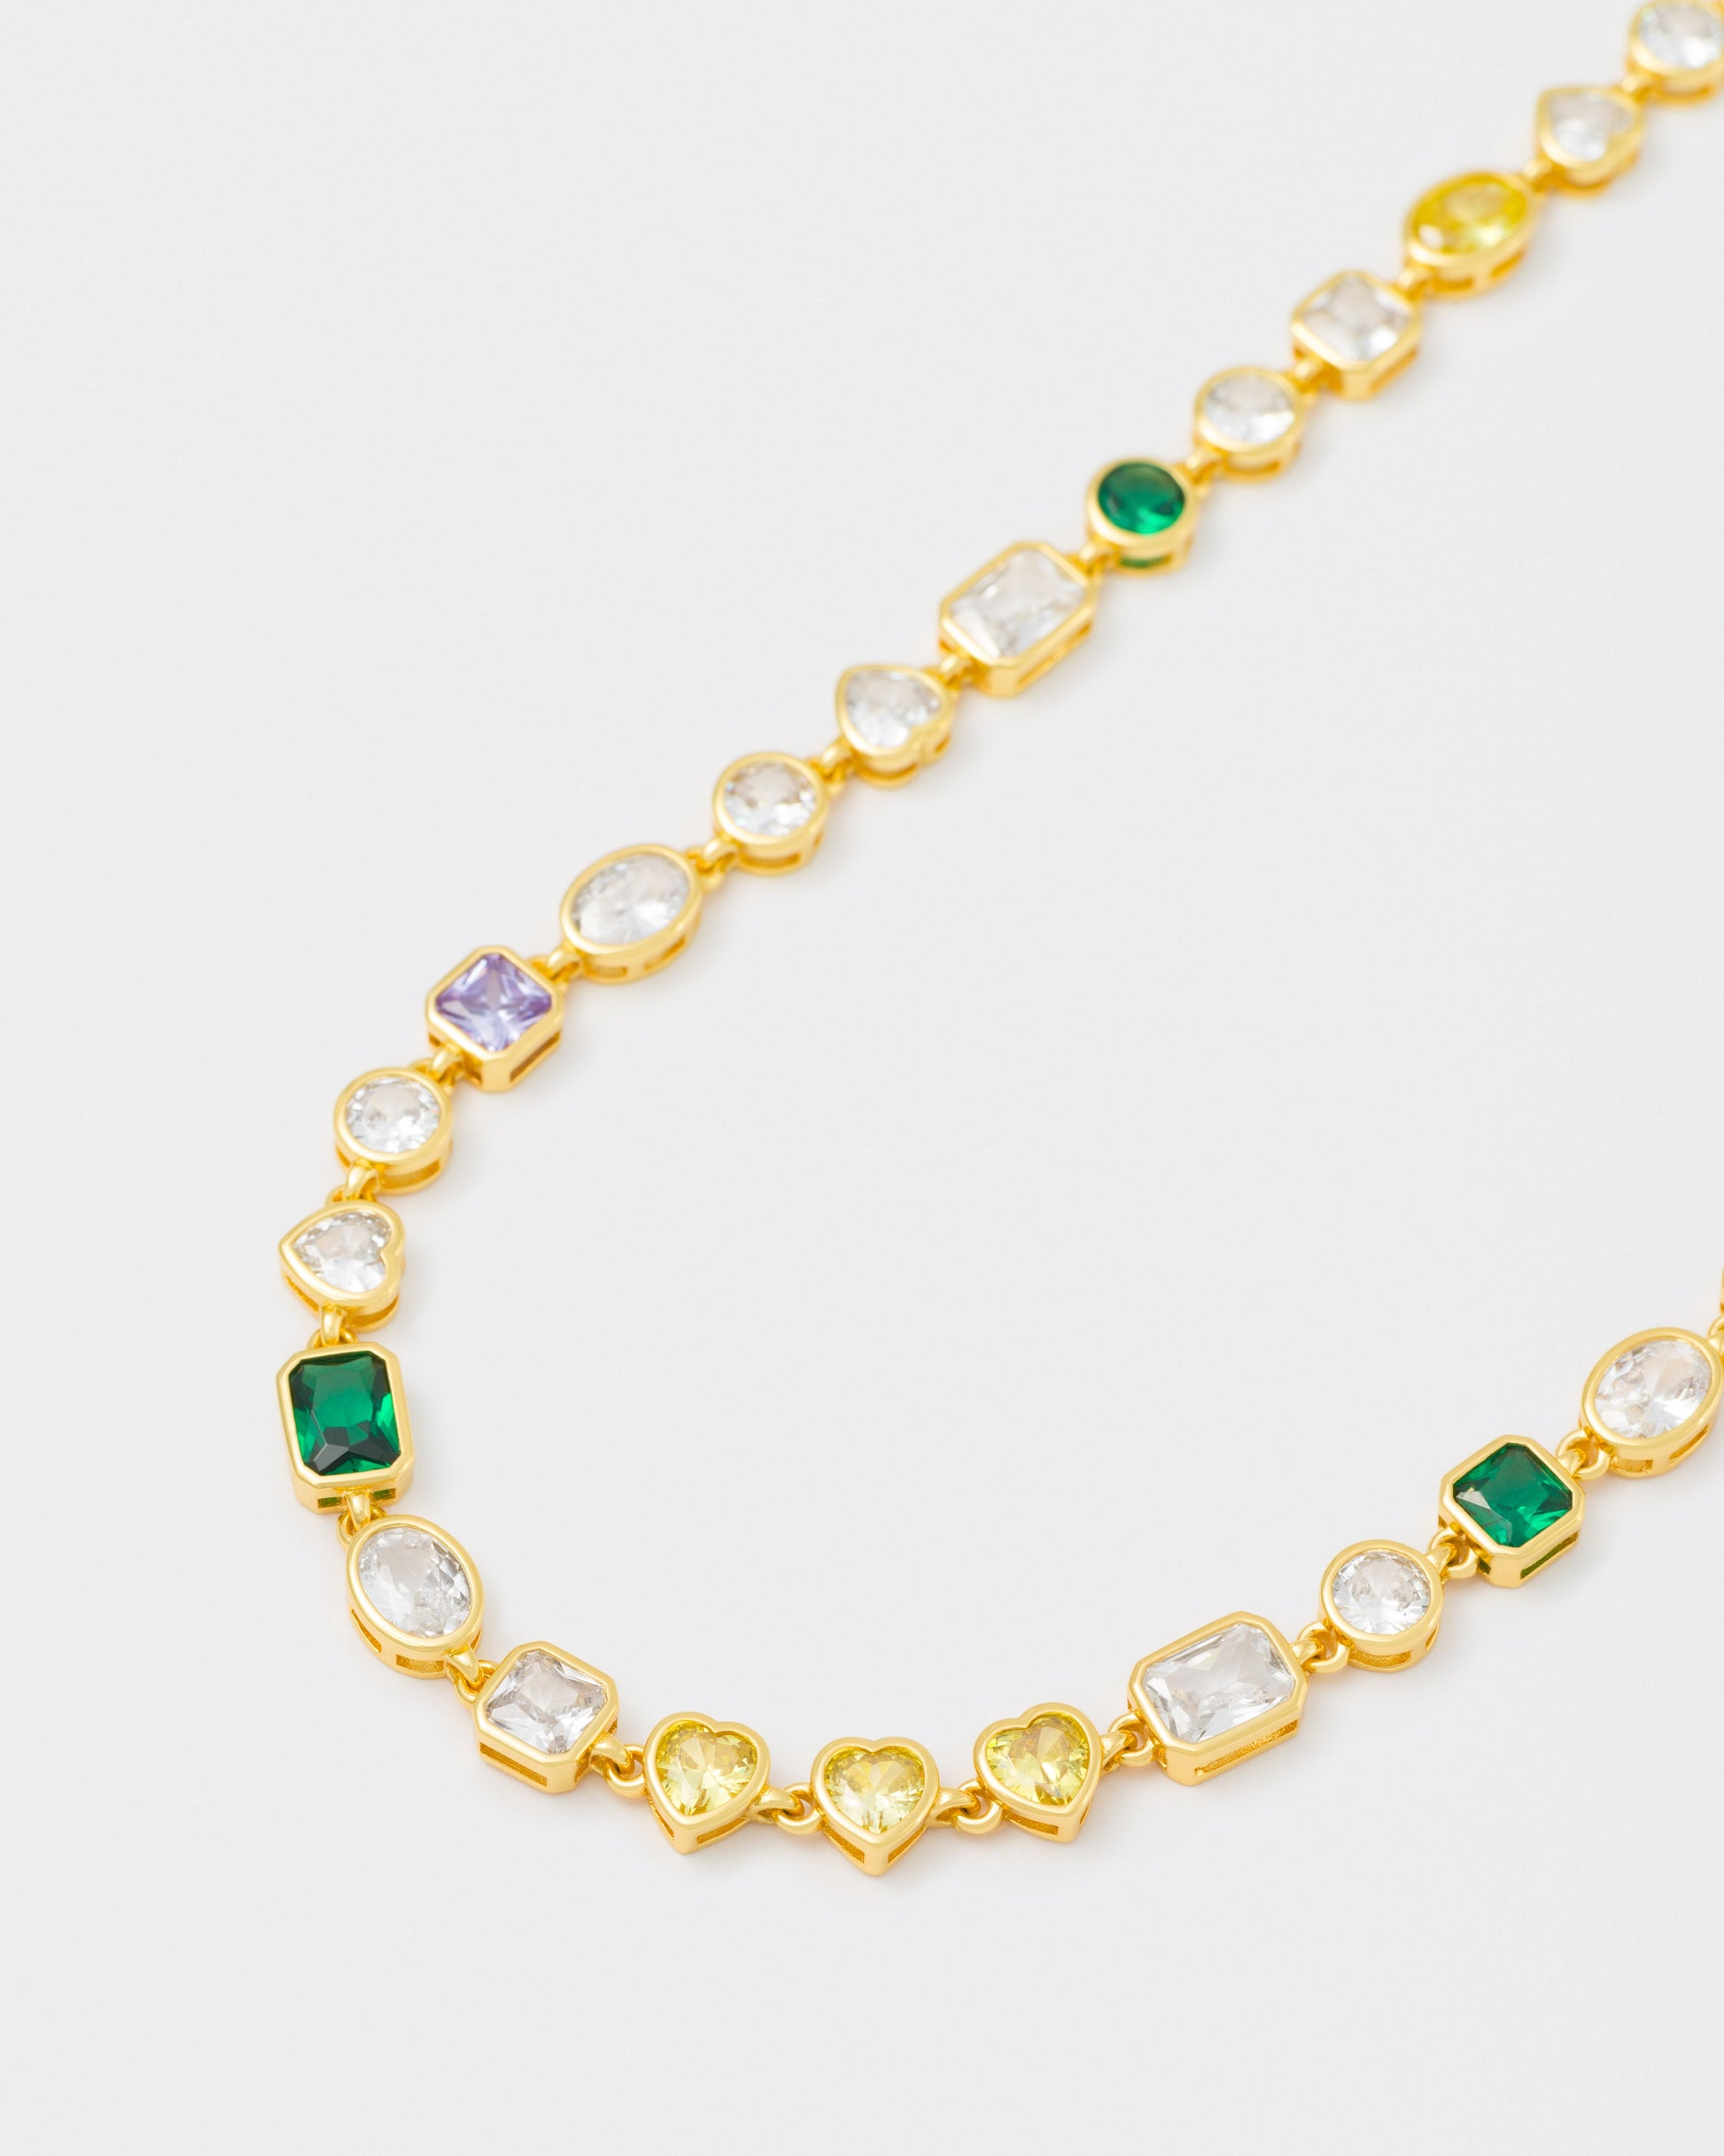 detail of 18k yellow gold coated mixed bezels chain necklace with hand-set stones in different shapes and colors. Mix of rectangular, square, round and heart-shaped stones in white, amethyst, emerald green and gold yellow